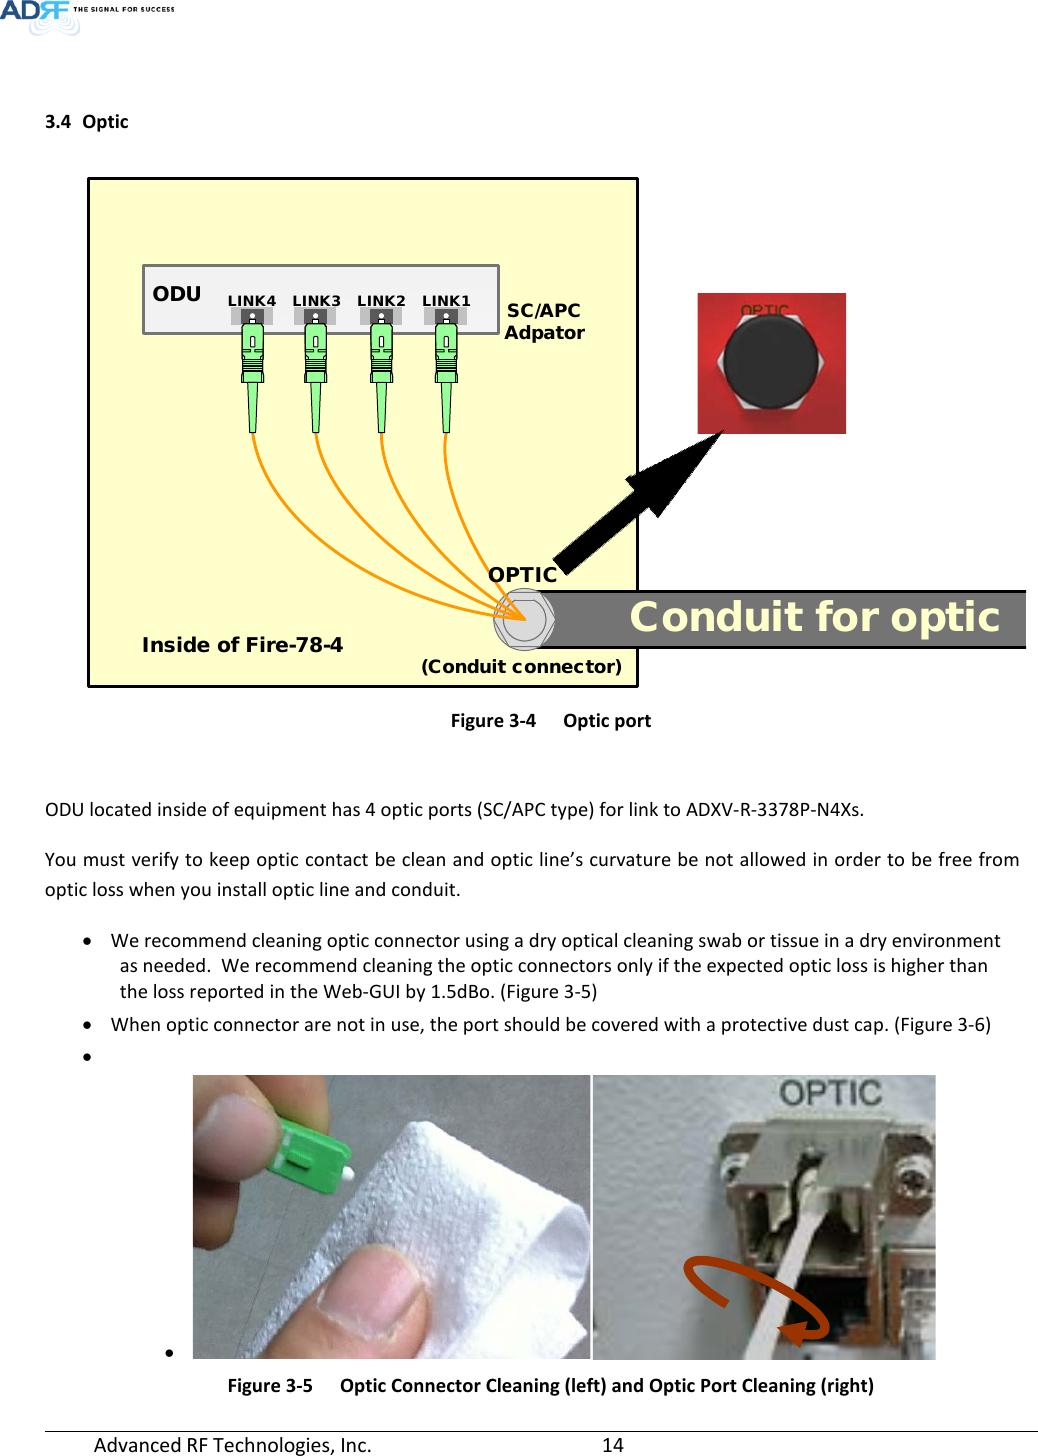  Advanced RF Technologies, Inc.       14    3.4 Optic     Figure 3-4  Optic port   ODU located inside of equipment has 4 optic ports (SC/APC type) for link to ADXV-R-3378P-N4Xs. You must verify to keep optic contact be clean and optic line’s curvature be not allowed in order to be free from optic loss when you install optic line and conduit. • We recommend cleaning optic connector using a dry optical cleaning swab or tissue in a dry environment as needed.  We recommend cleaning the optic connectors only if the expected optic loss is higher than the loss reported in the Web-GUI by 1.5dBo. (Figure 3-5) • When optic connector are not in use, the port should be covered with a protective dust cap. (Figure 3-6) •  •  Figure 3-5  Optic Connector Cleaning (left) and Optic Port Cleaning (right) Conduit for opticODU LINK1LINK2LINK3LINK4OPTICInside of Fire-78-4 (Conduit connector)SC/APC Adpator